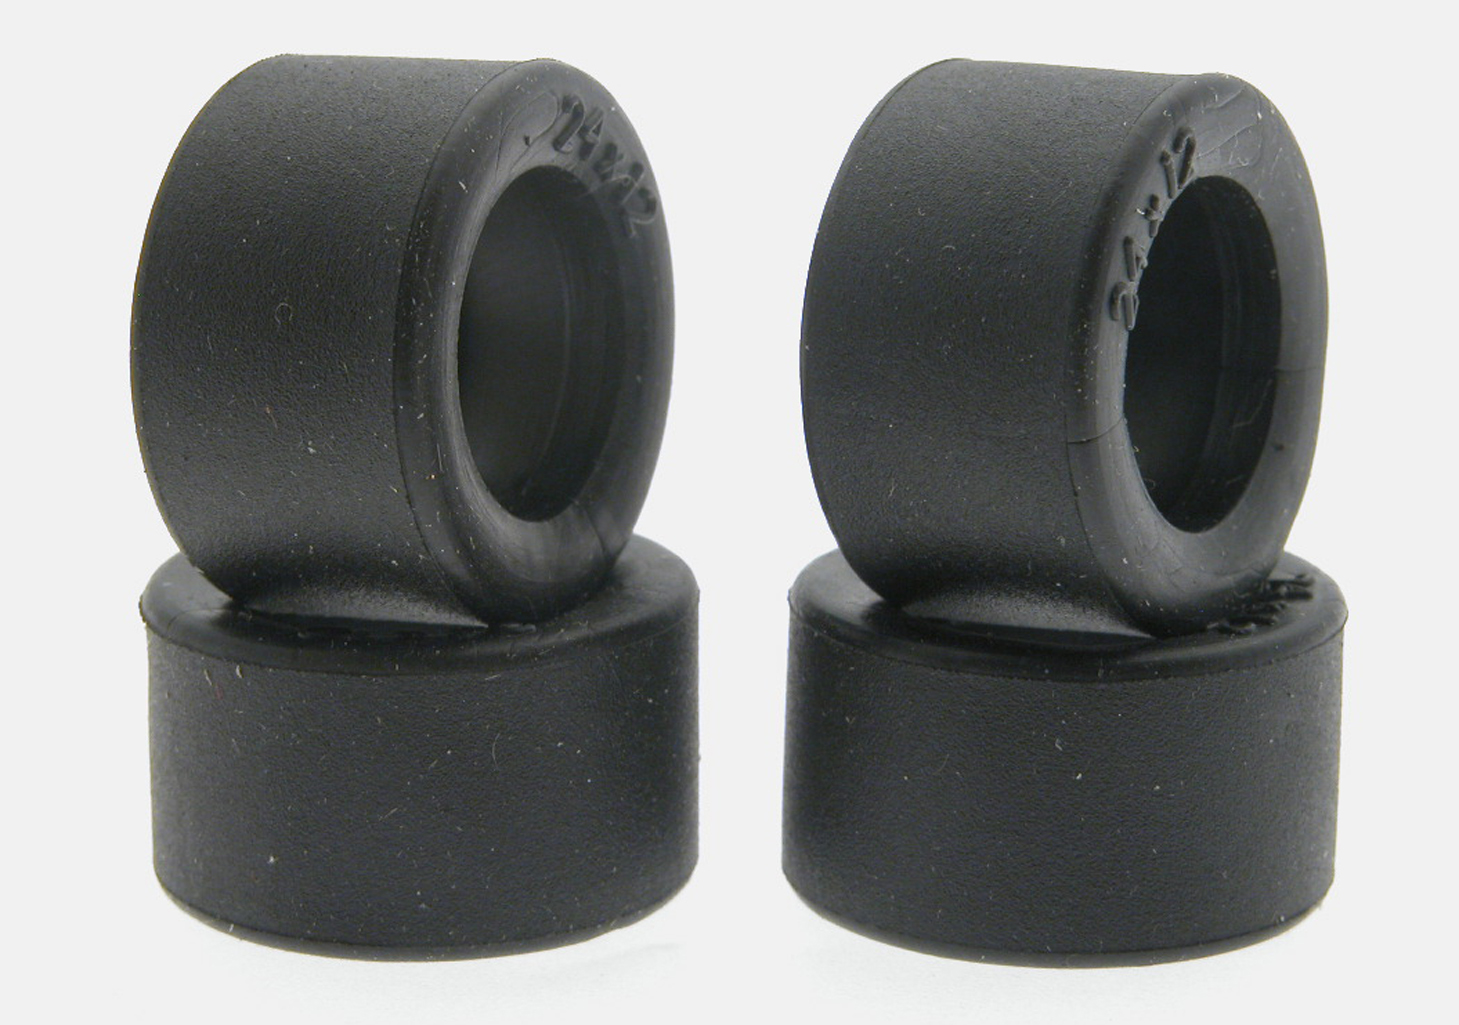 SC-4731"RT Soft" Racing Rubber tires for Profile hubs